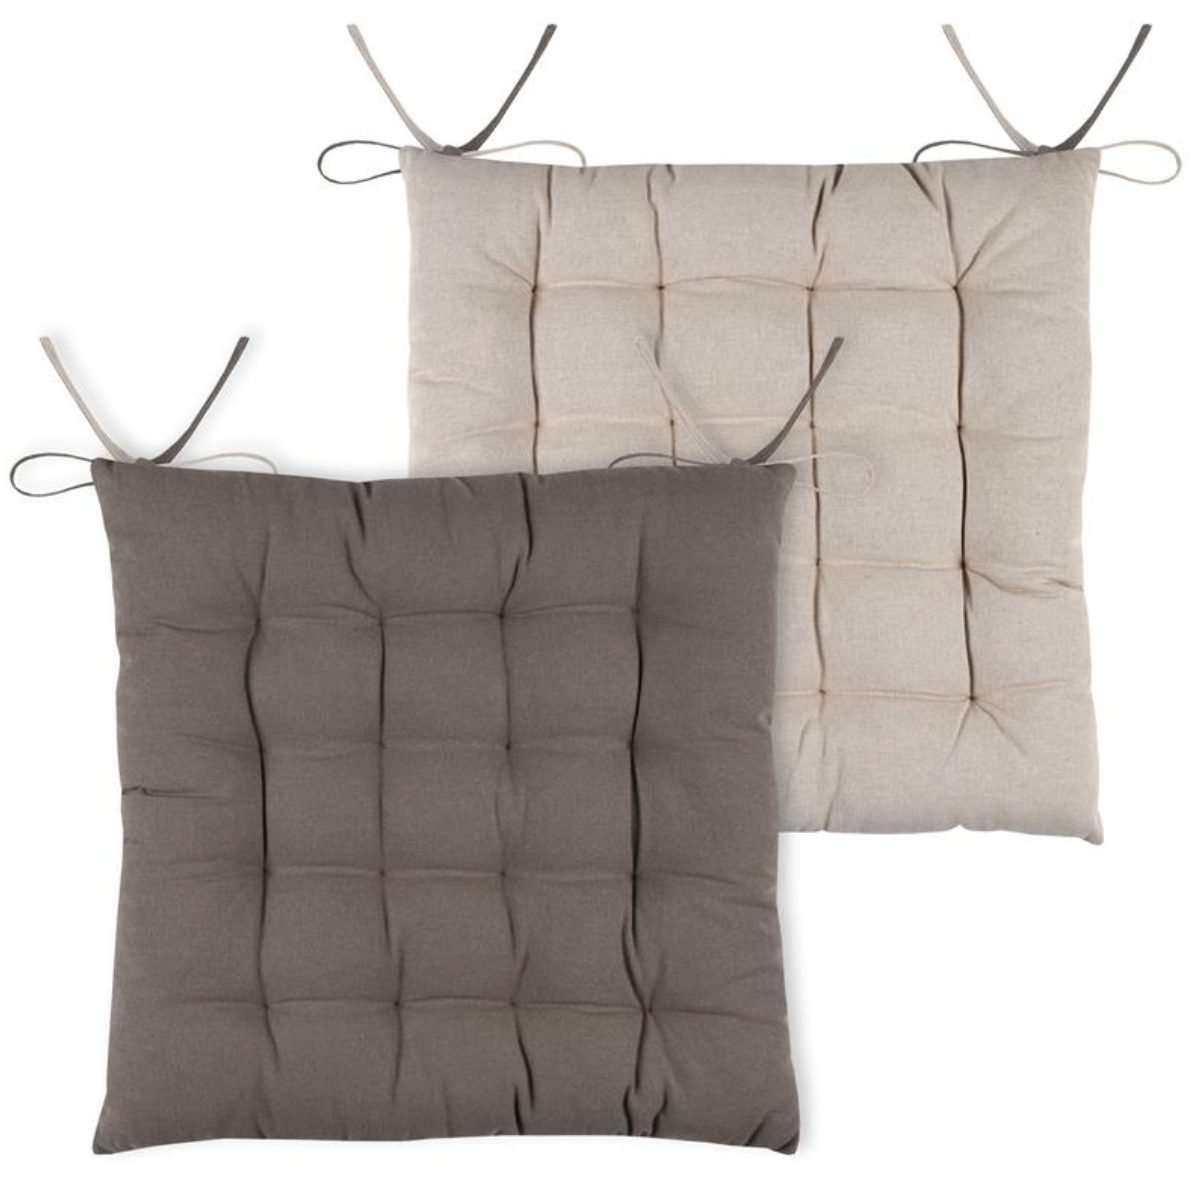 Reversible two-tone chair cushion in cotton - Taupe and Linen